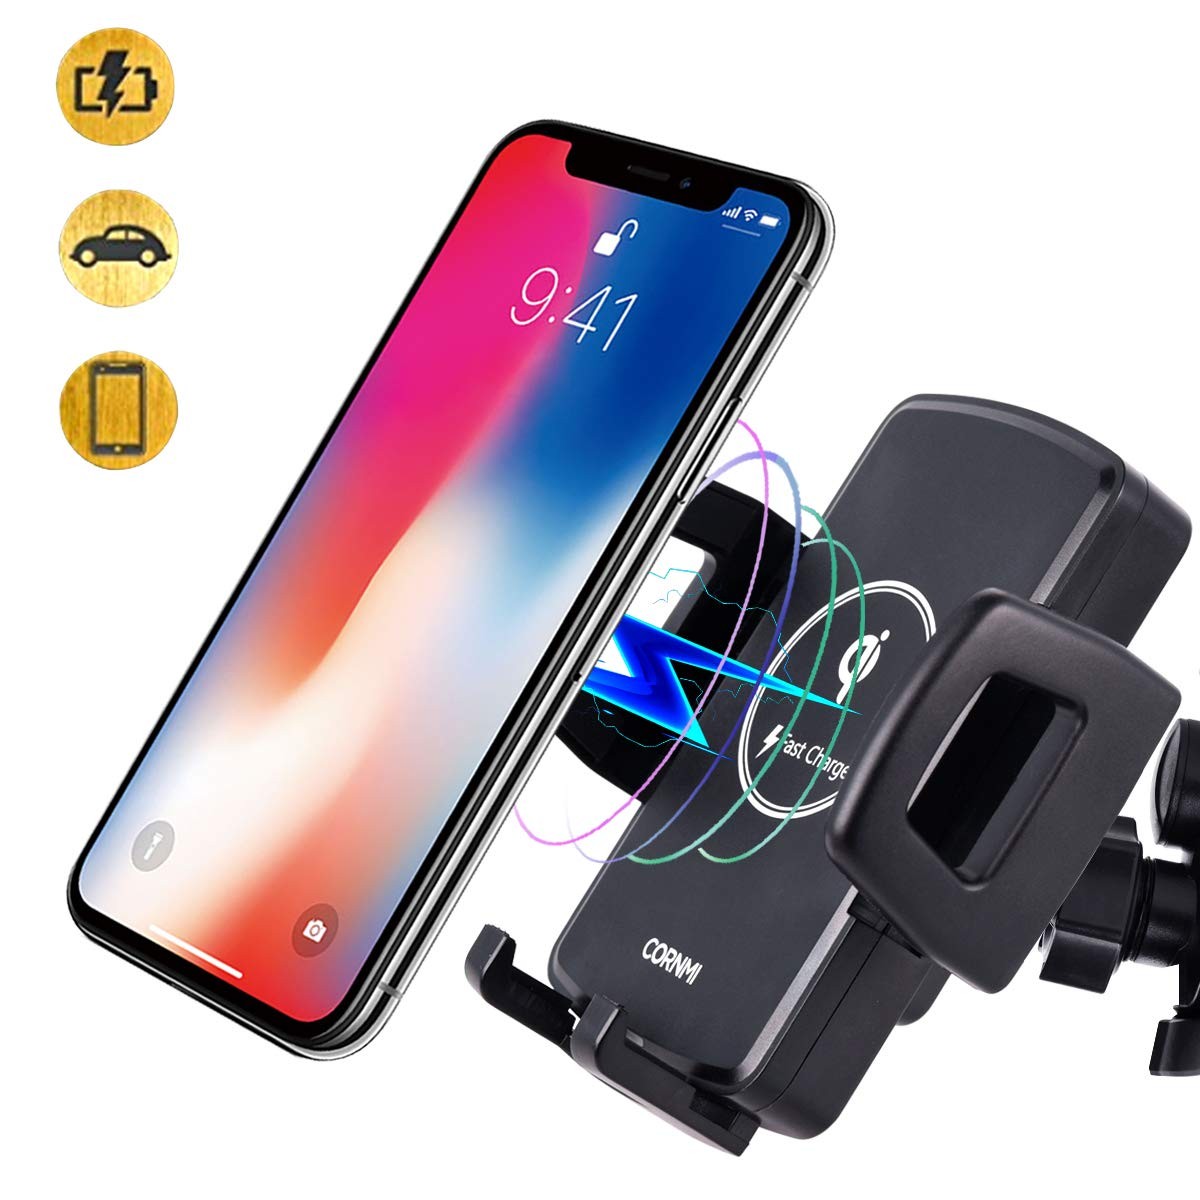 CORNMI Wireless Car Charger Mount Qi Car Charger Car Phone Mount Air Vent Phone Holder for Car patible for iPhone XS MAX XR XS X 8 8 Plus Samsung Galaxy